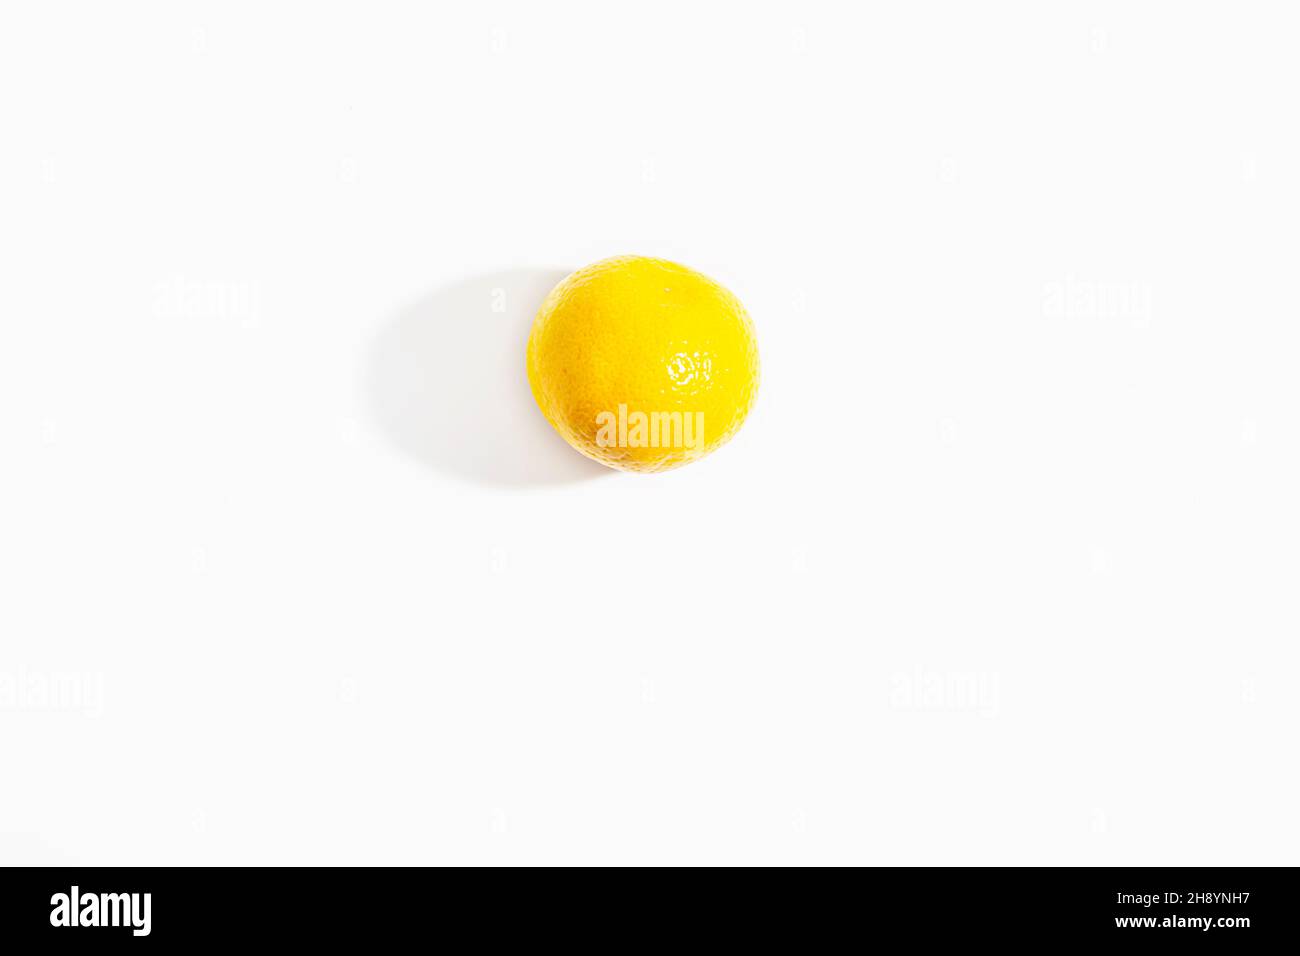 One whole tangerine on a white background. New Year and Christmas symbol. Isolate. Lifestyle. Close-up. View from above. Horizontal photo. High quality photo Stock Photo